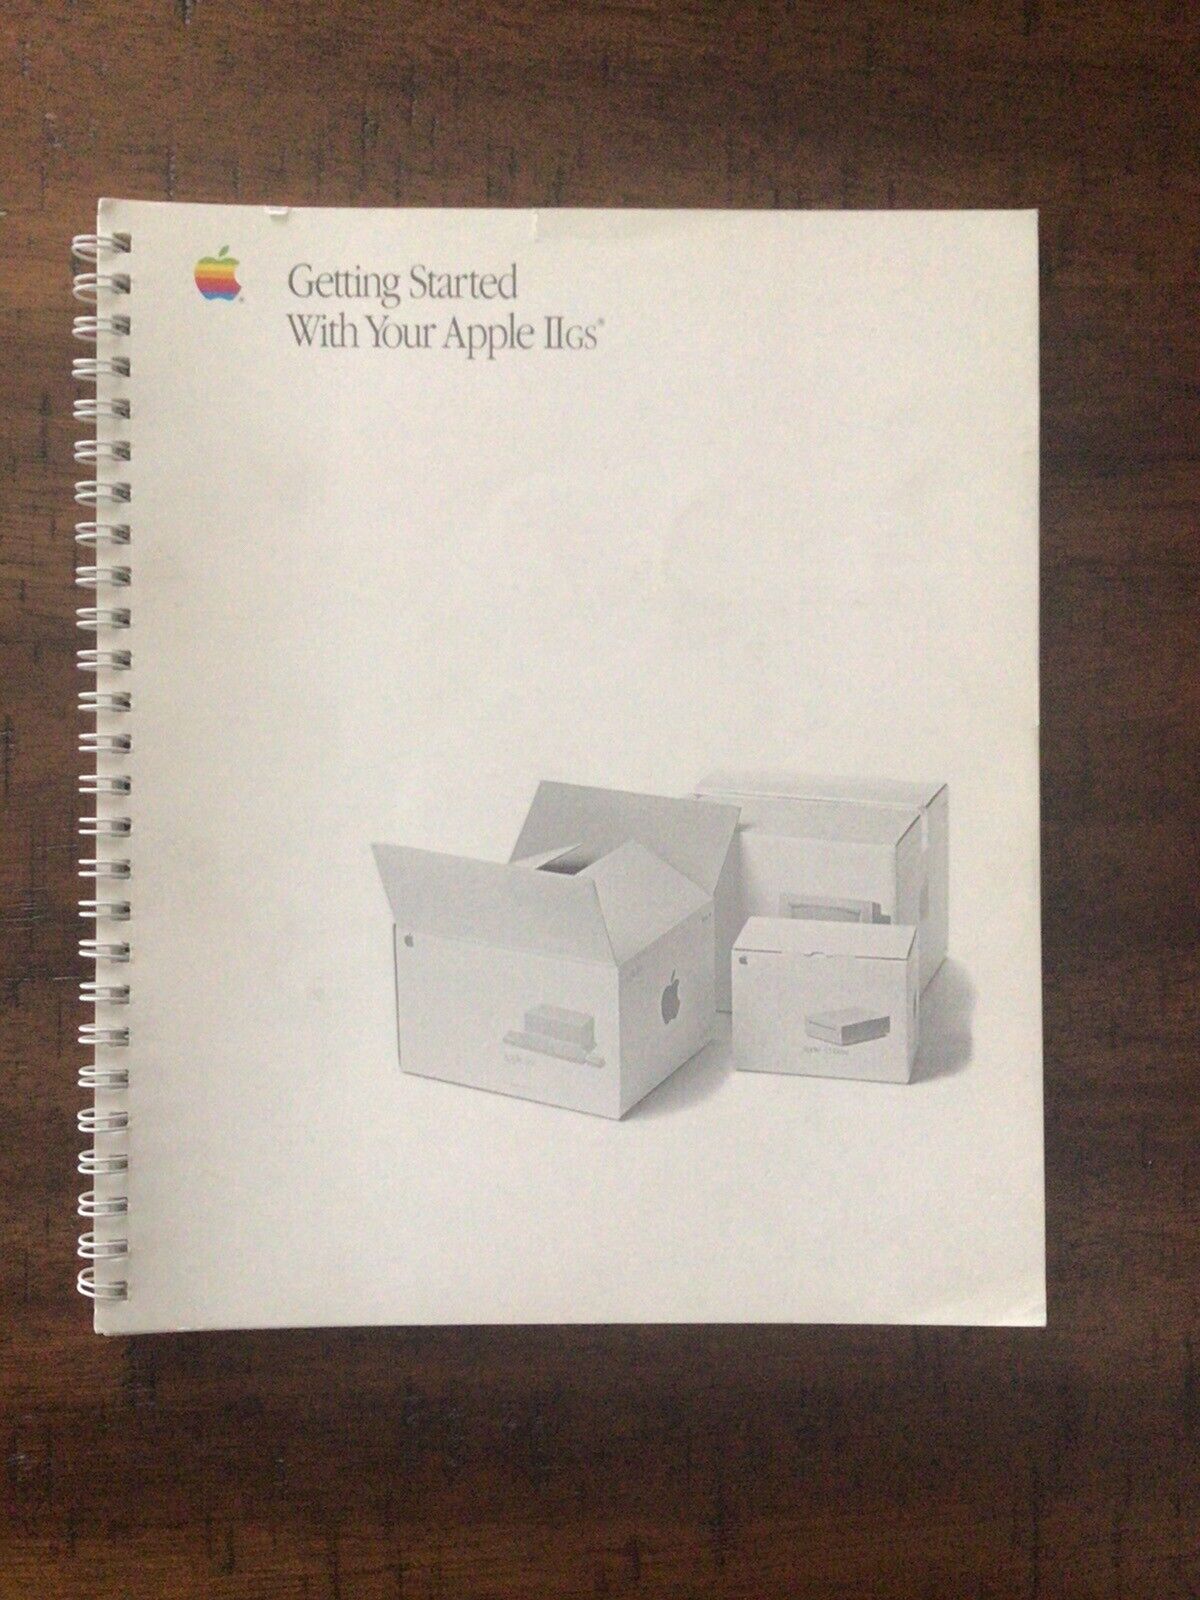 Vintage 1989 Getting Started With Your Apple IIGS II GS Manual